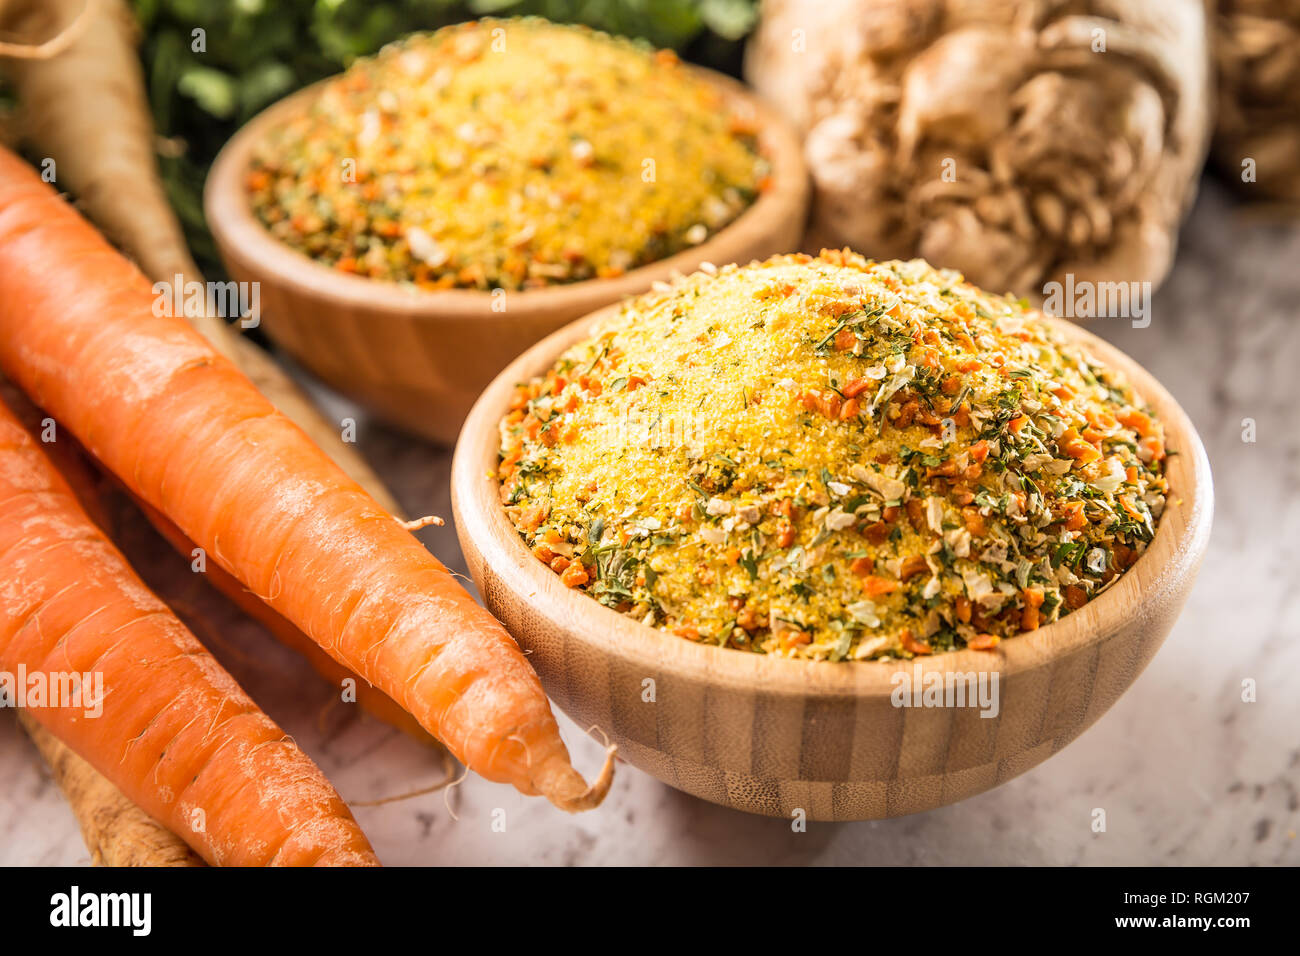 Seasoning spices condiment parsnips and salt carrot from parsley Photo - dehydrated celery vegeta Alamy without Stock or with glutamate